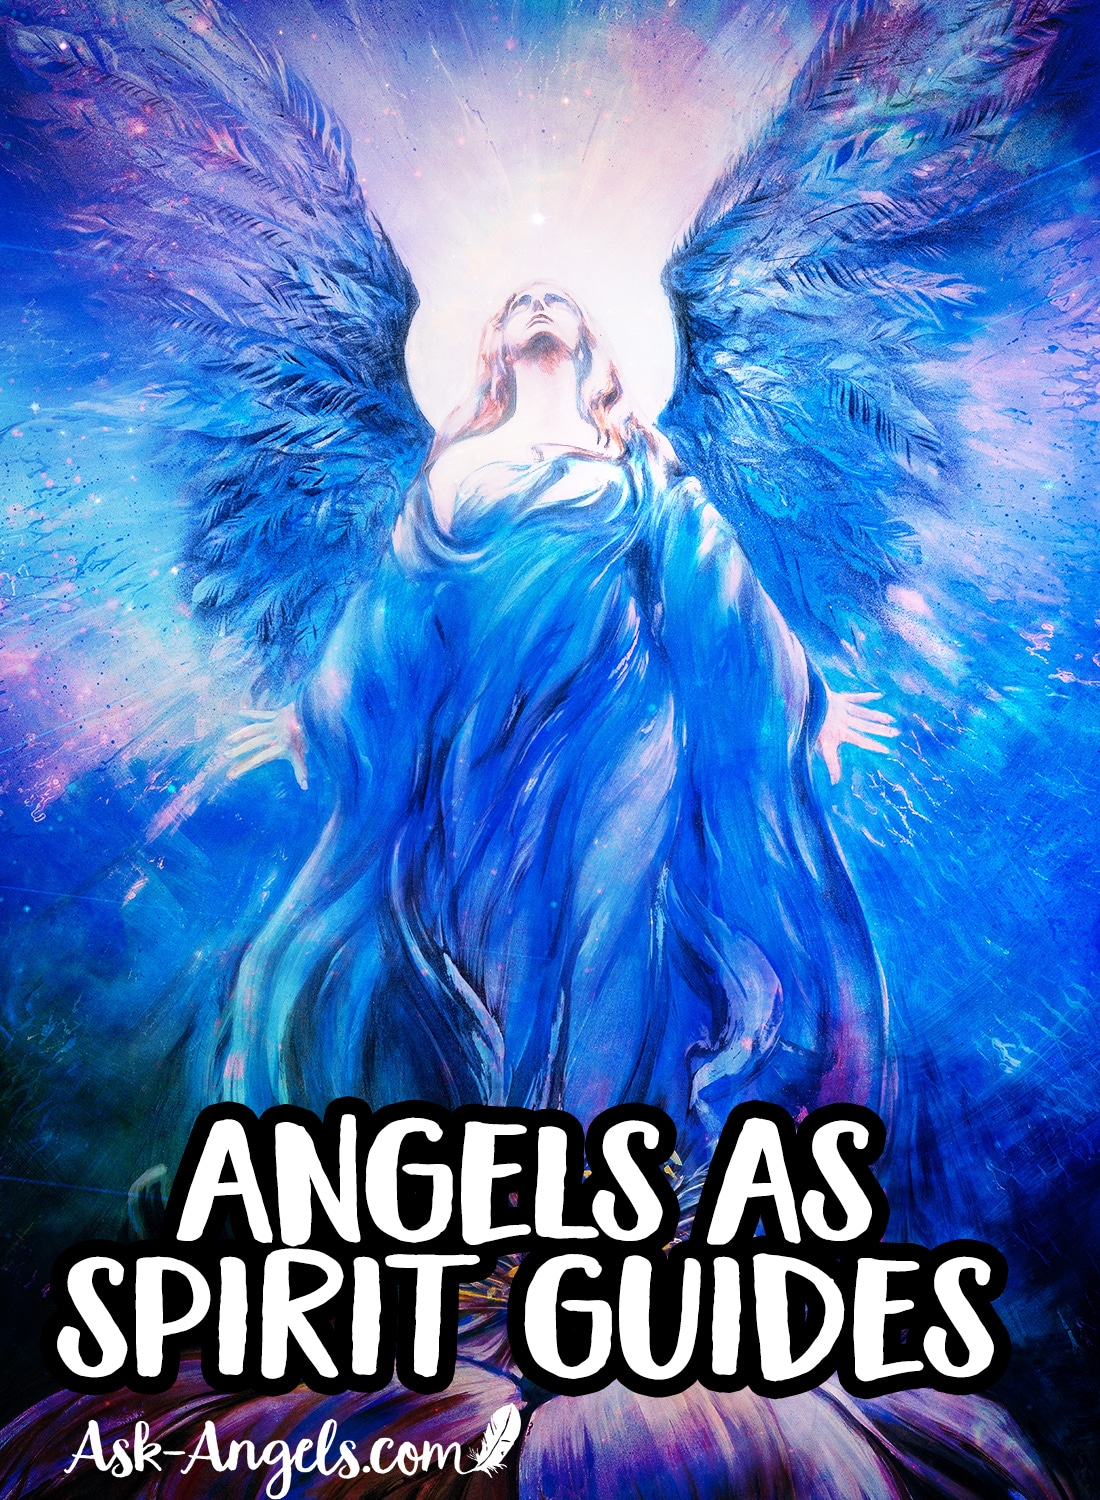 Angels as Spirit Guides